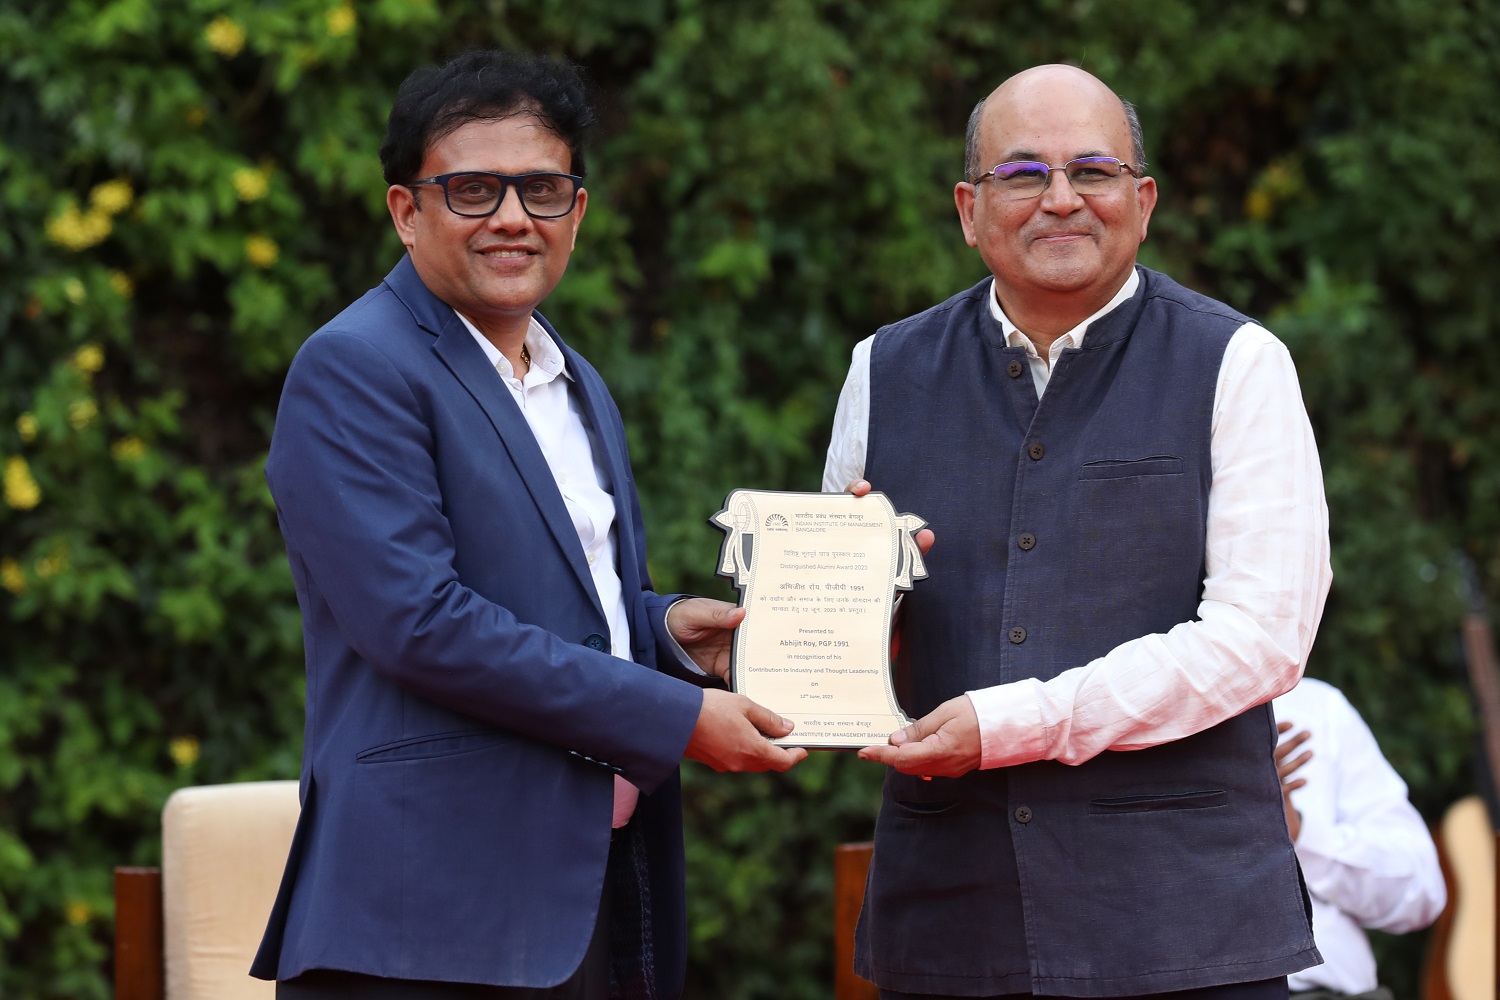 Prof. Rishikesha T Krishnan, Director, IIMB, presents the Distinguished Alumnus Award 2023 to Abhijit Roy, PGP 1991, and MD & CEO of Berger Paints India Limited.